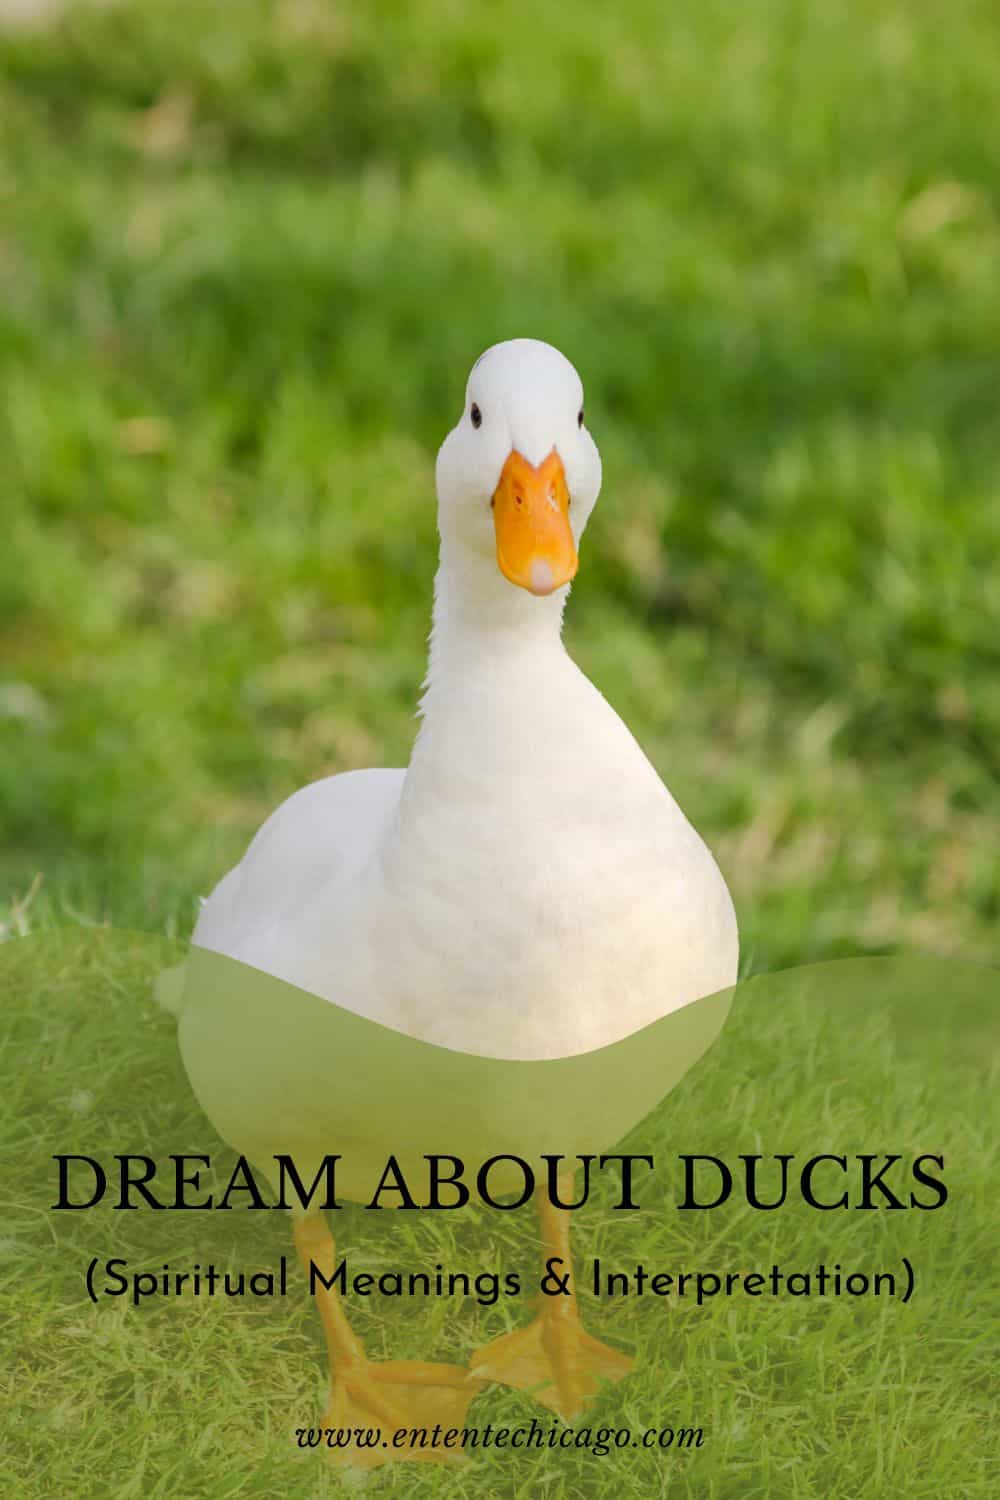 What does it mean when you dream about ducks